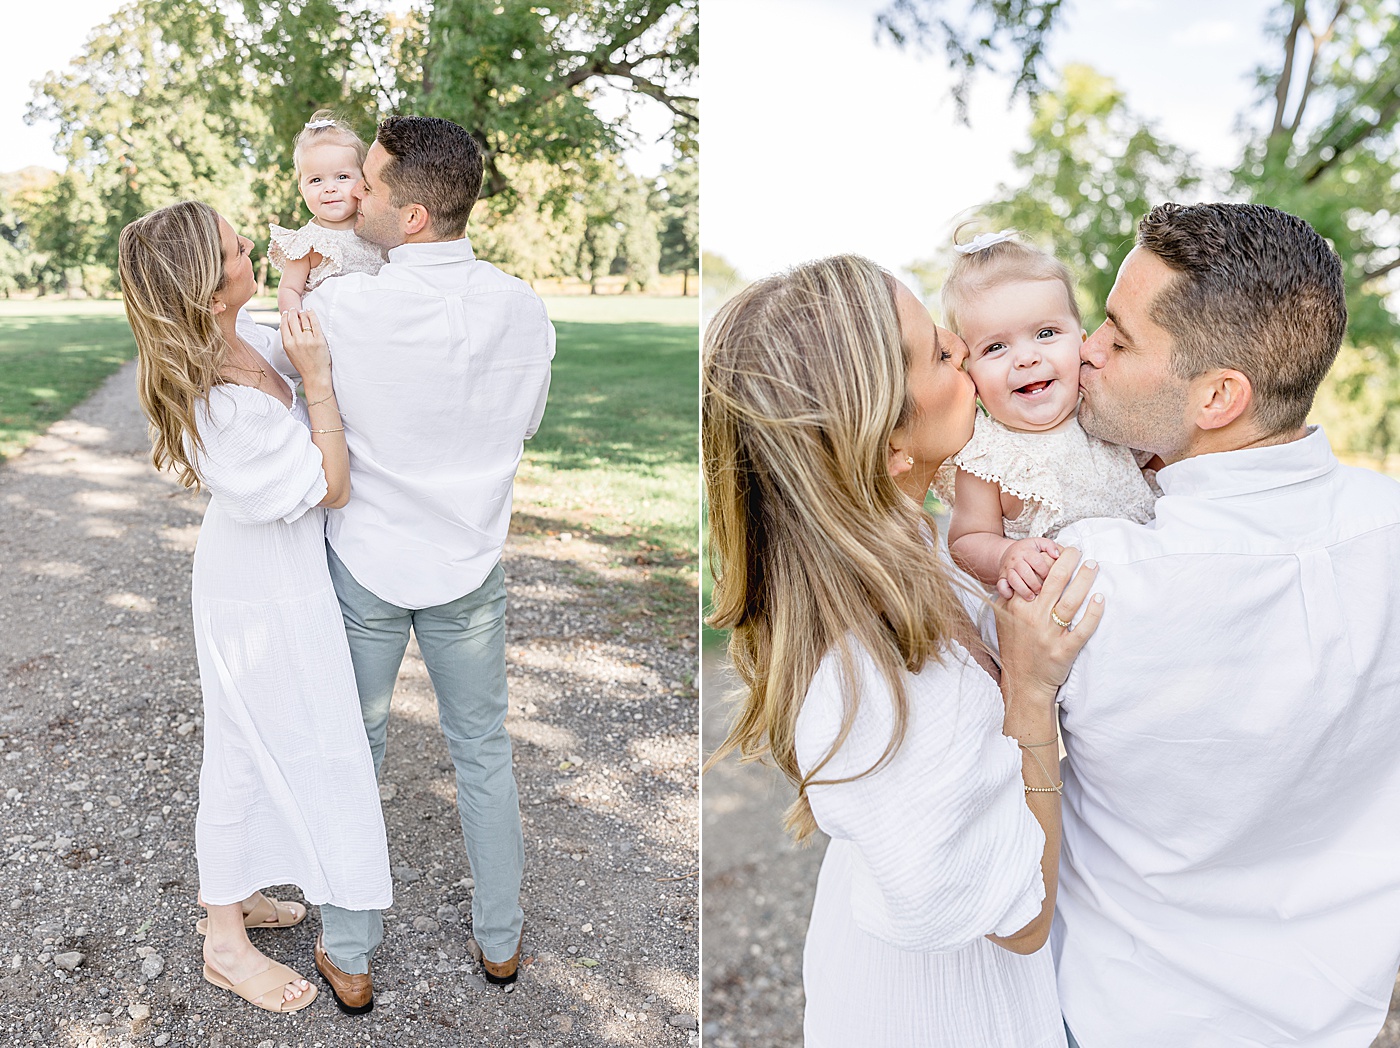 Outdoor family photoshoot at Sherwood Island State Park, Westport CT | Kristin Wood Photography